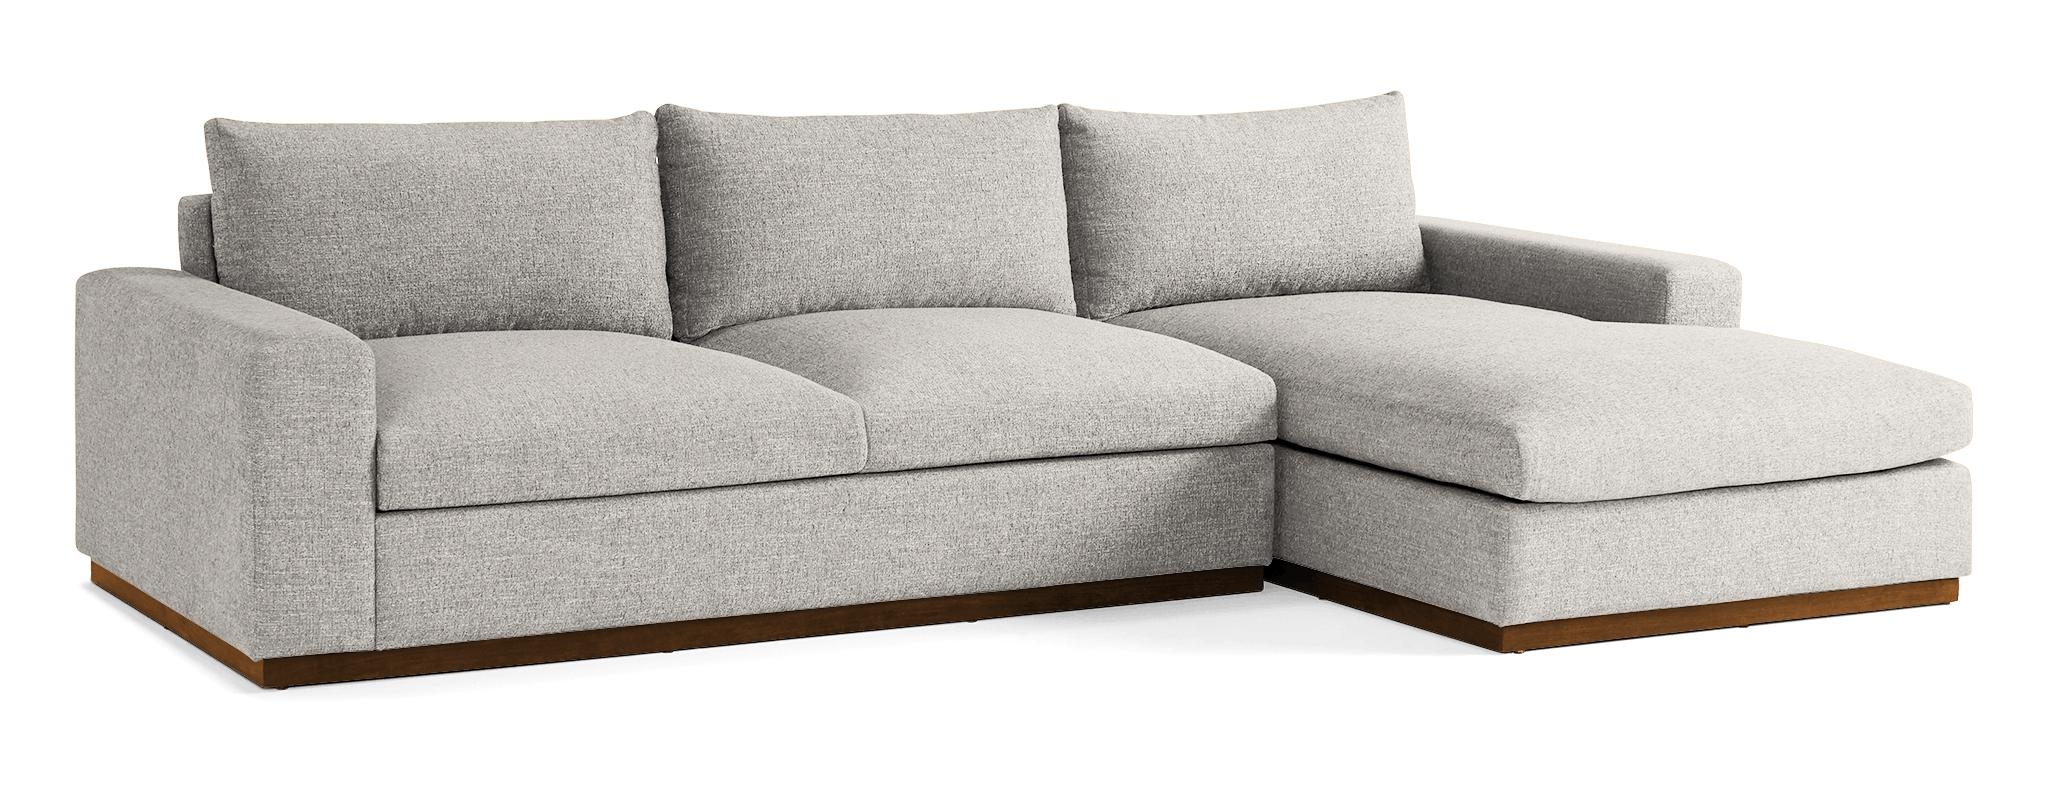 Beige/White Holt Mid Century Modern Sectional with Storage - Merit Dove - Mocha - Right - Image 1